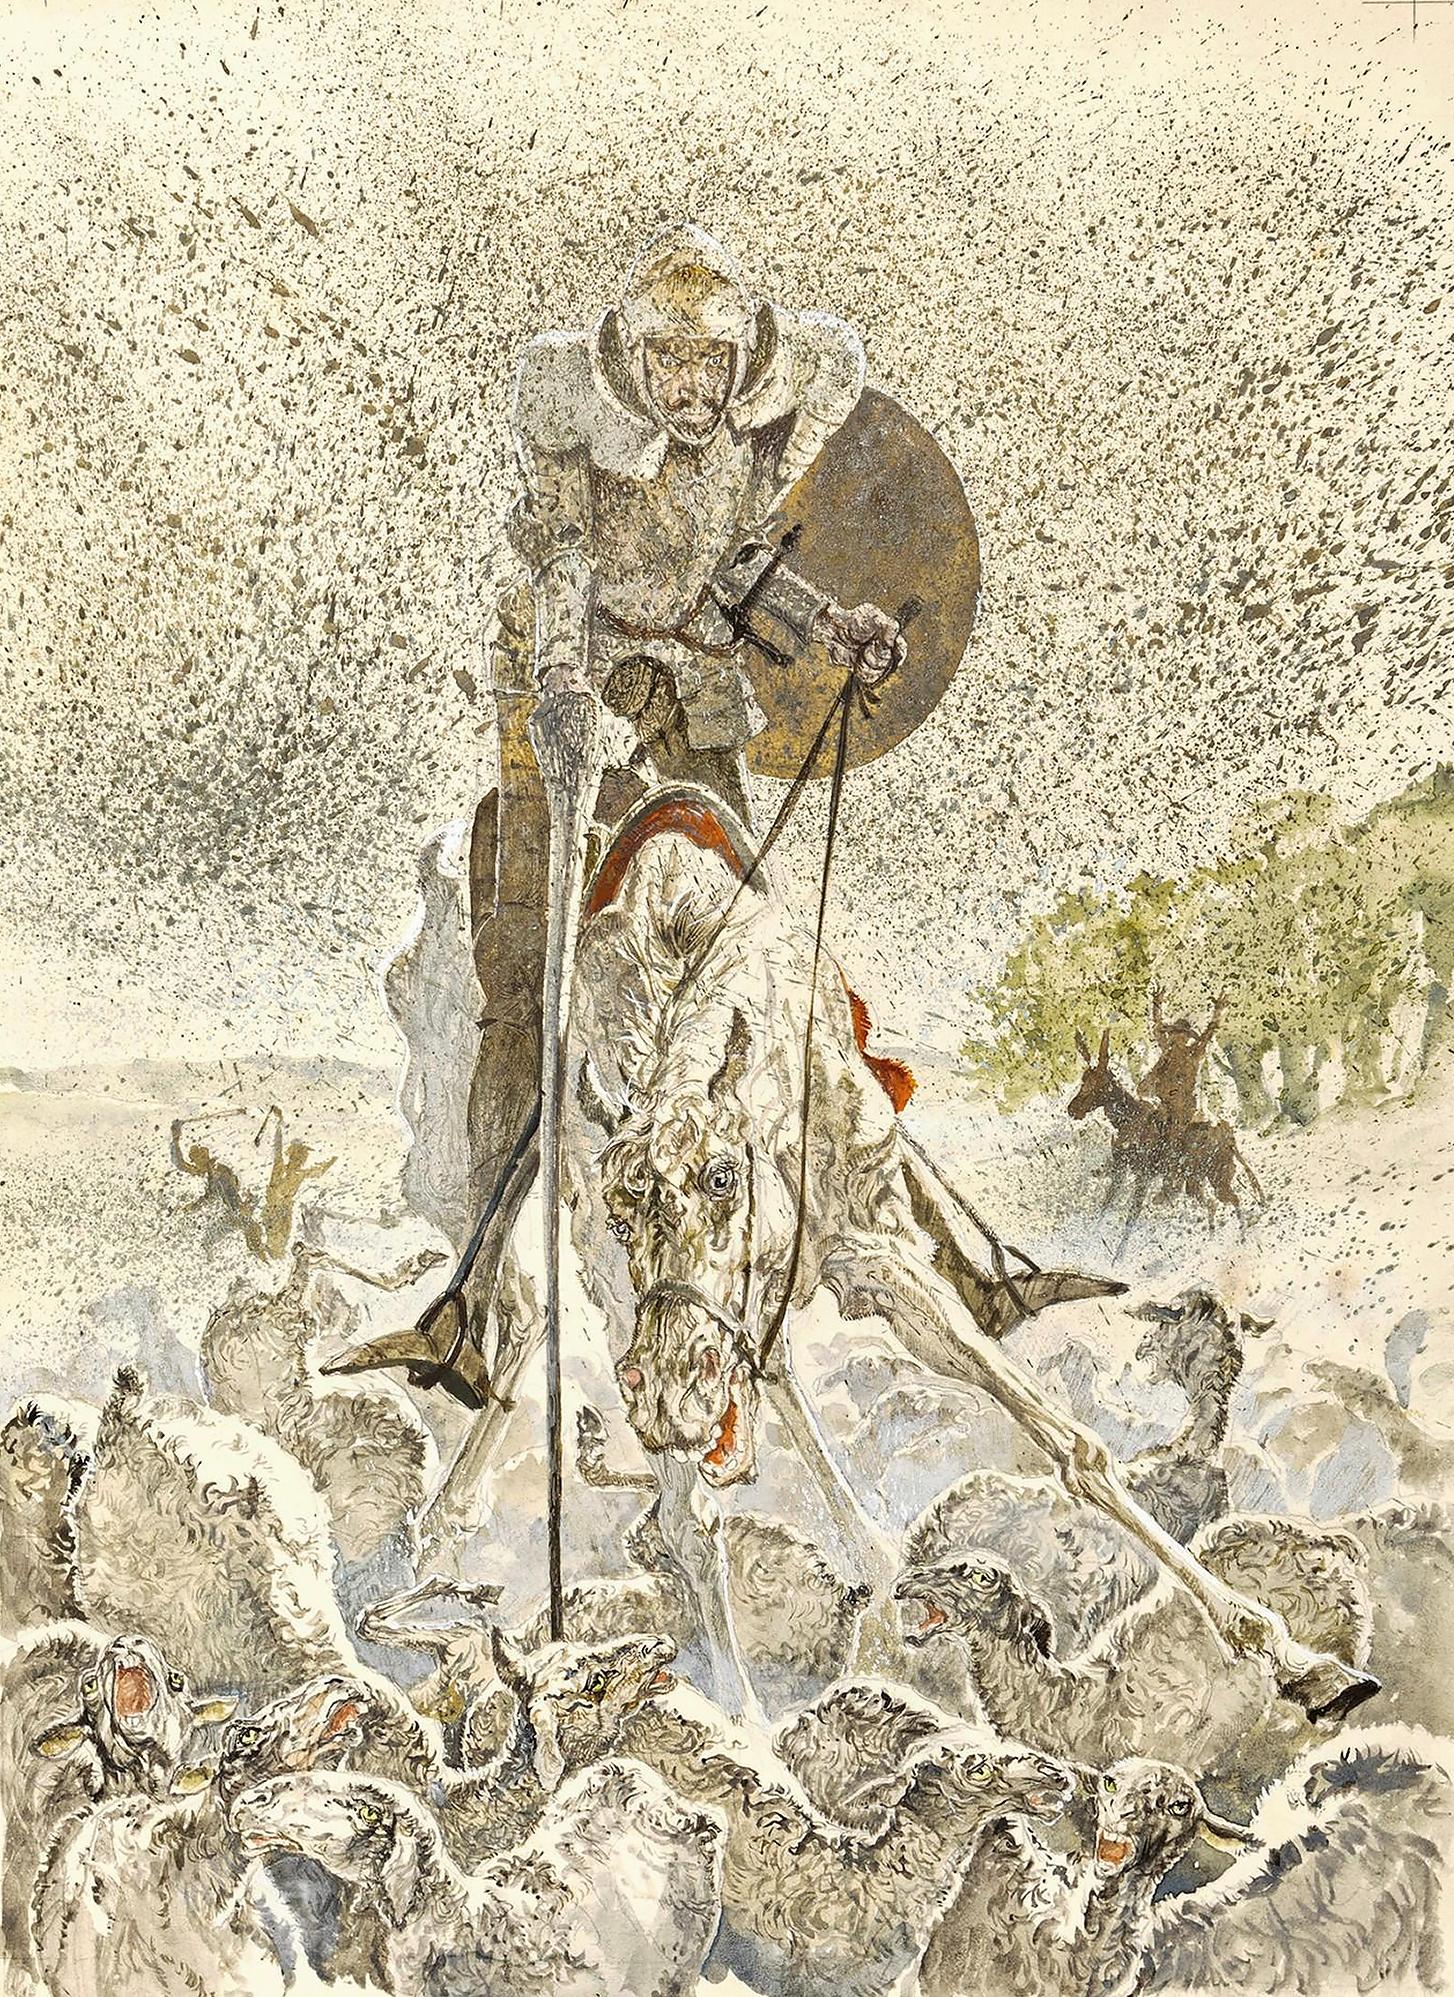 Don Quixote -  Nobleman on Horse with Sheep  - Action Painting 